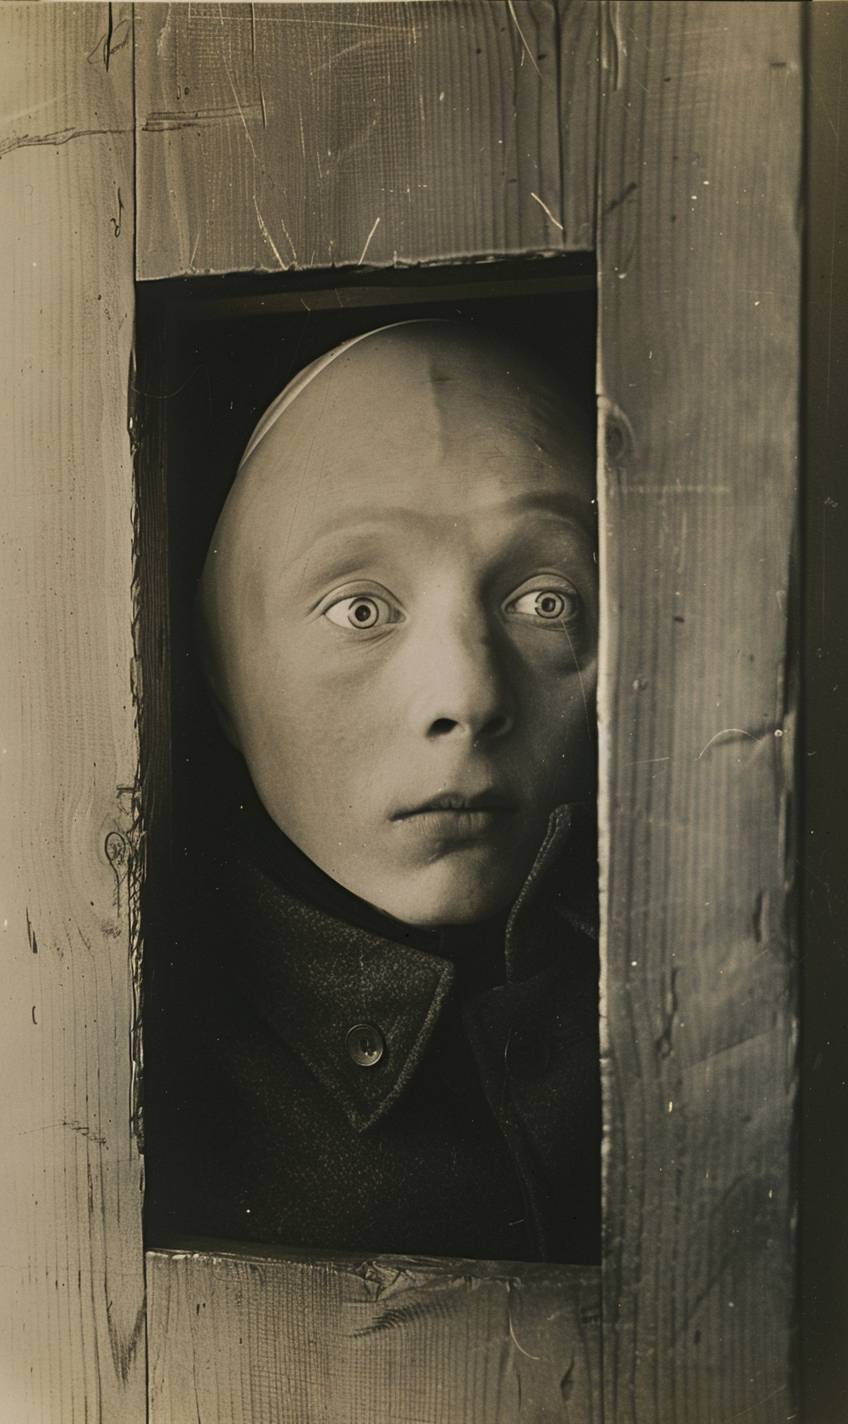 Claude Cahun's photograph depicting George Tooker's painting